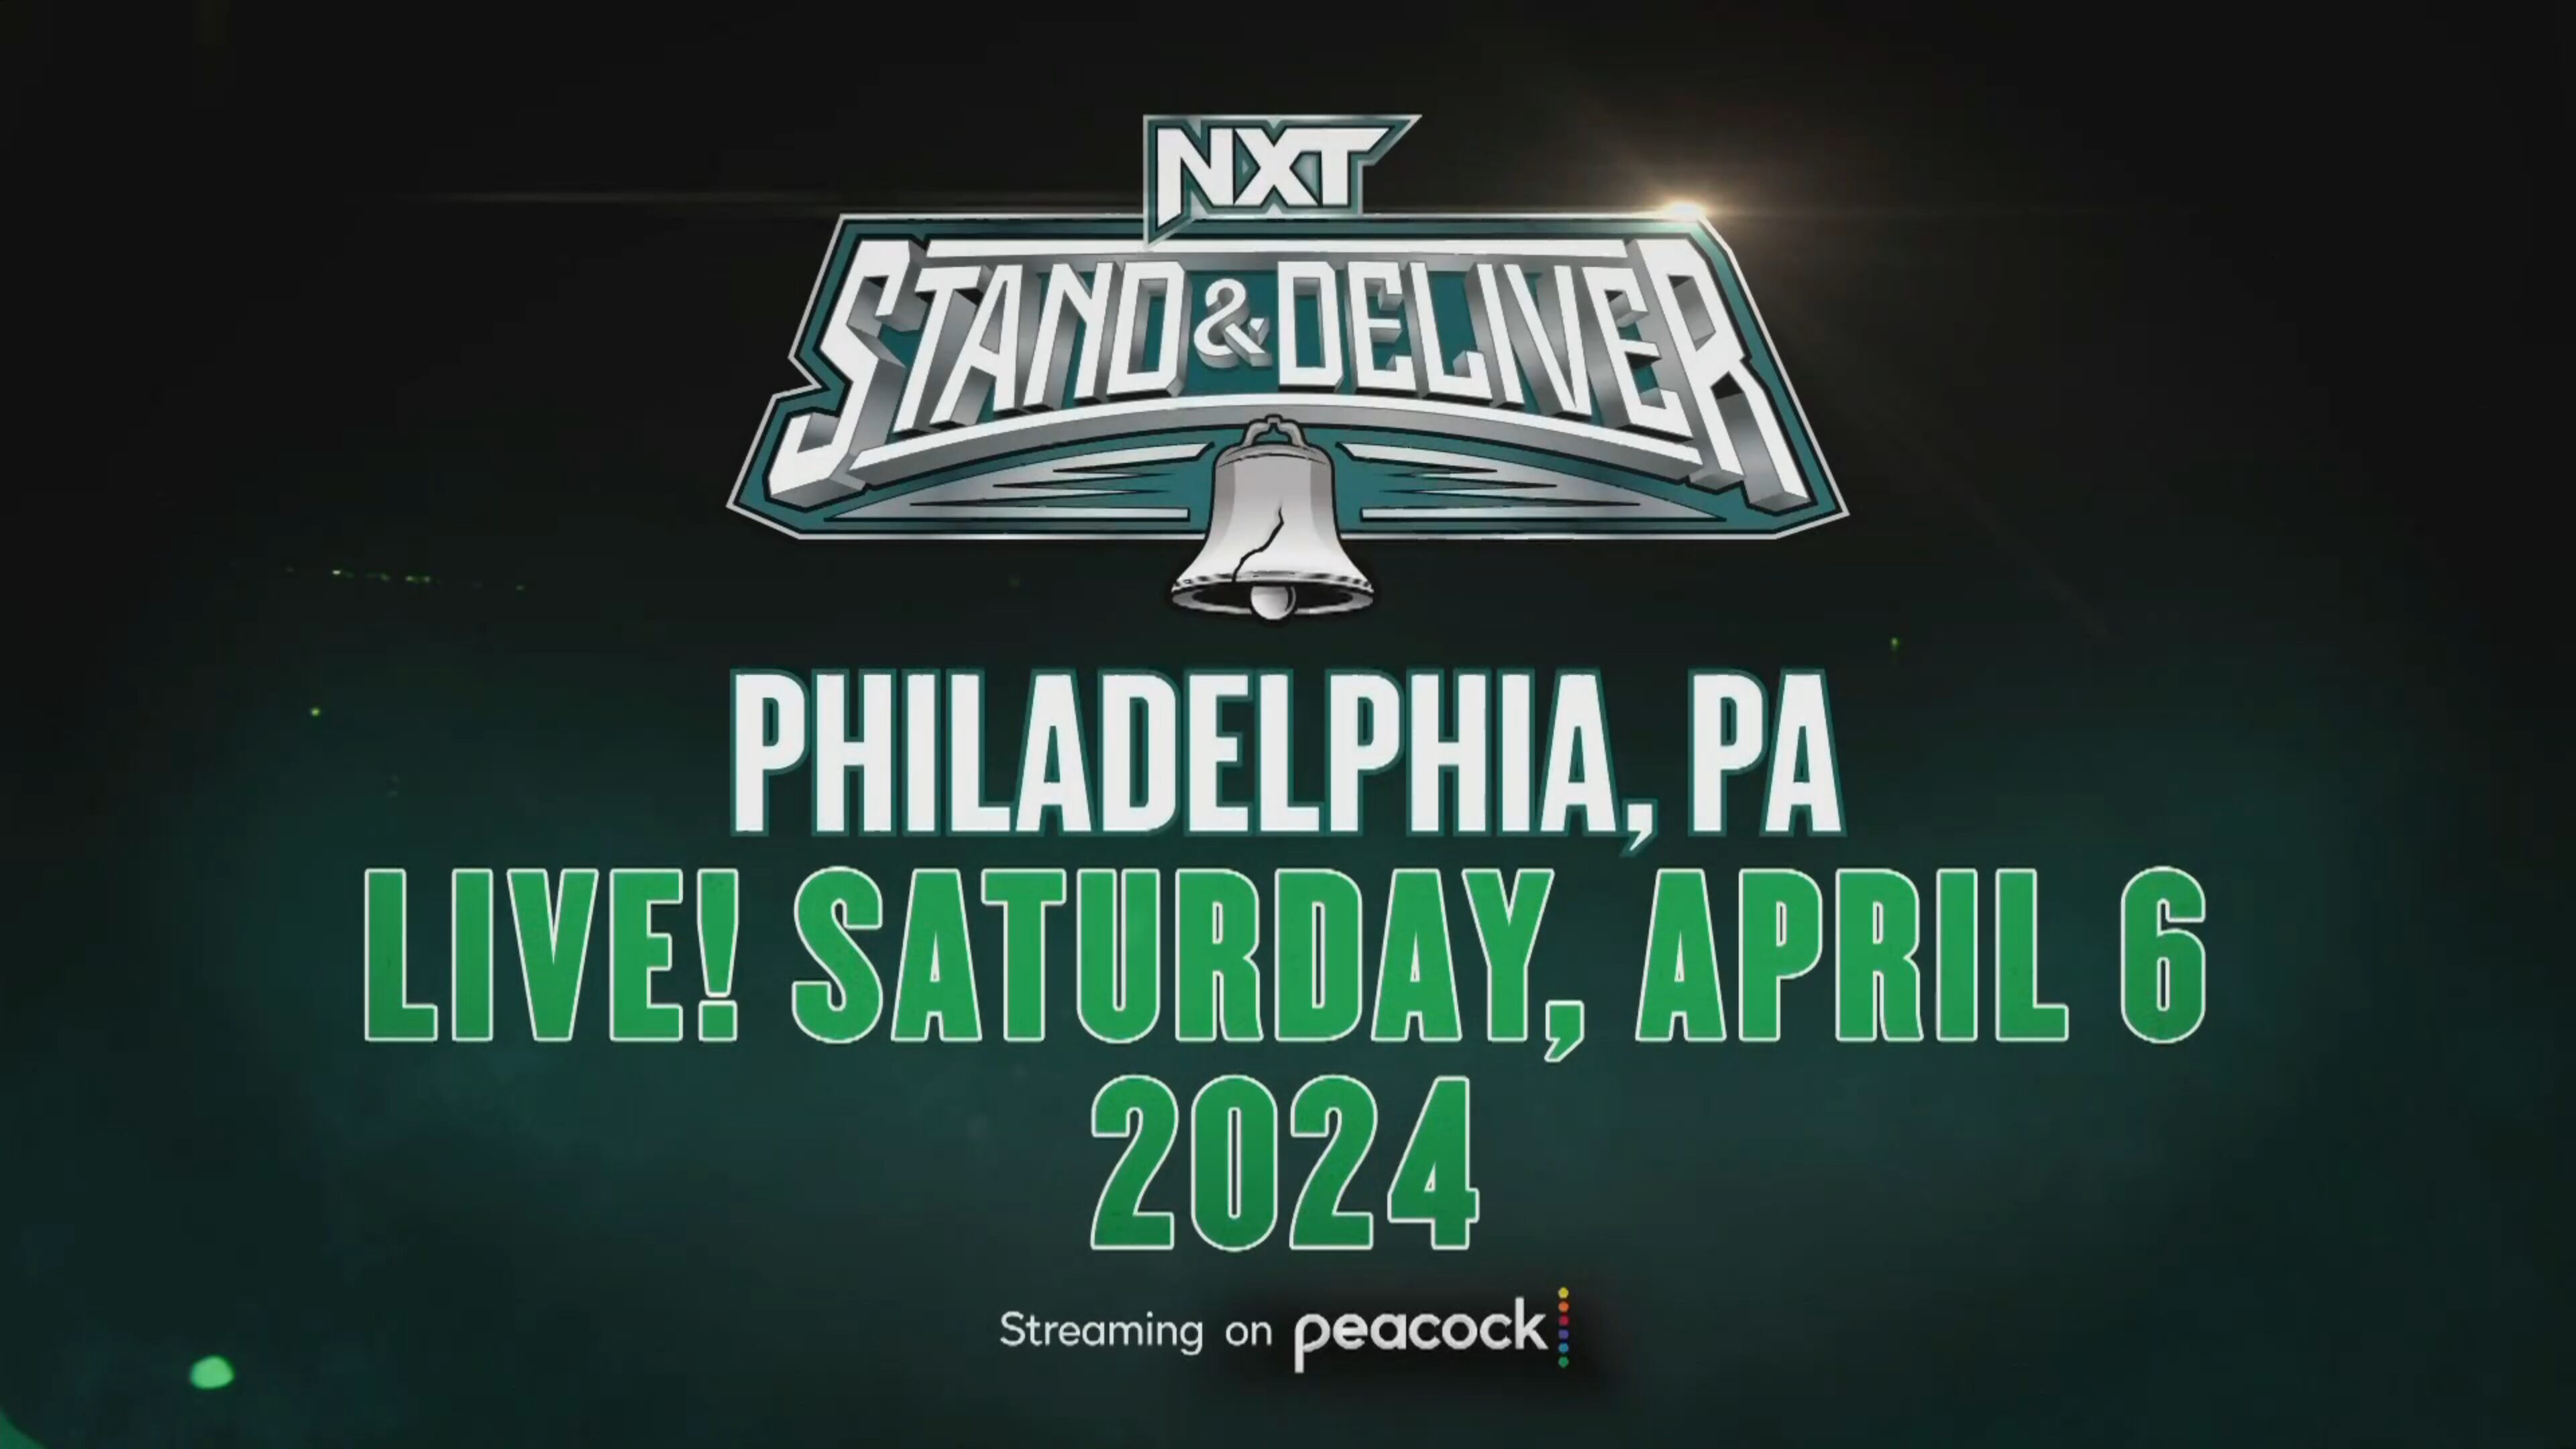 NXT Stand & Deliver 2024: An Exciting Two-Night Event